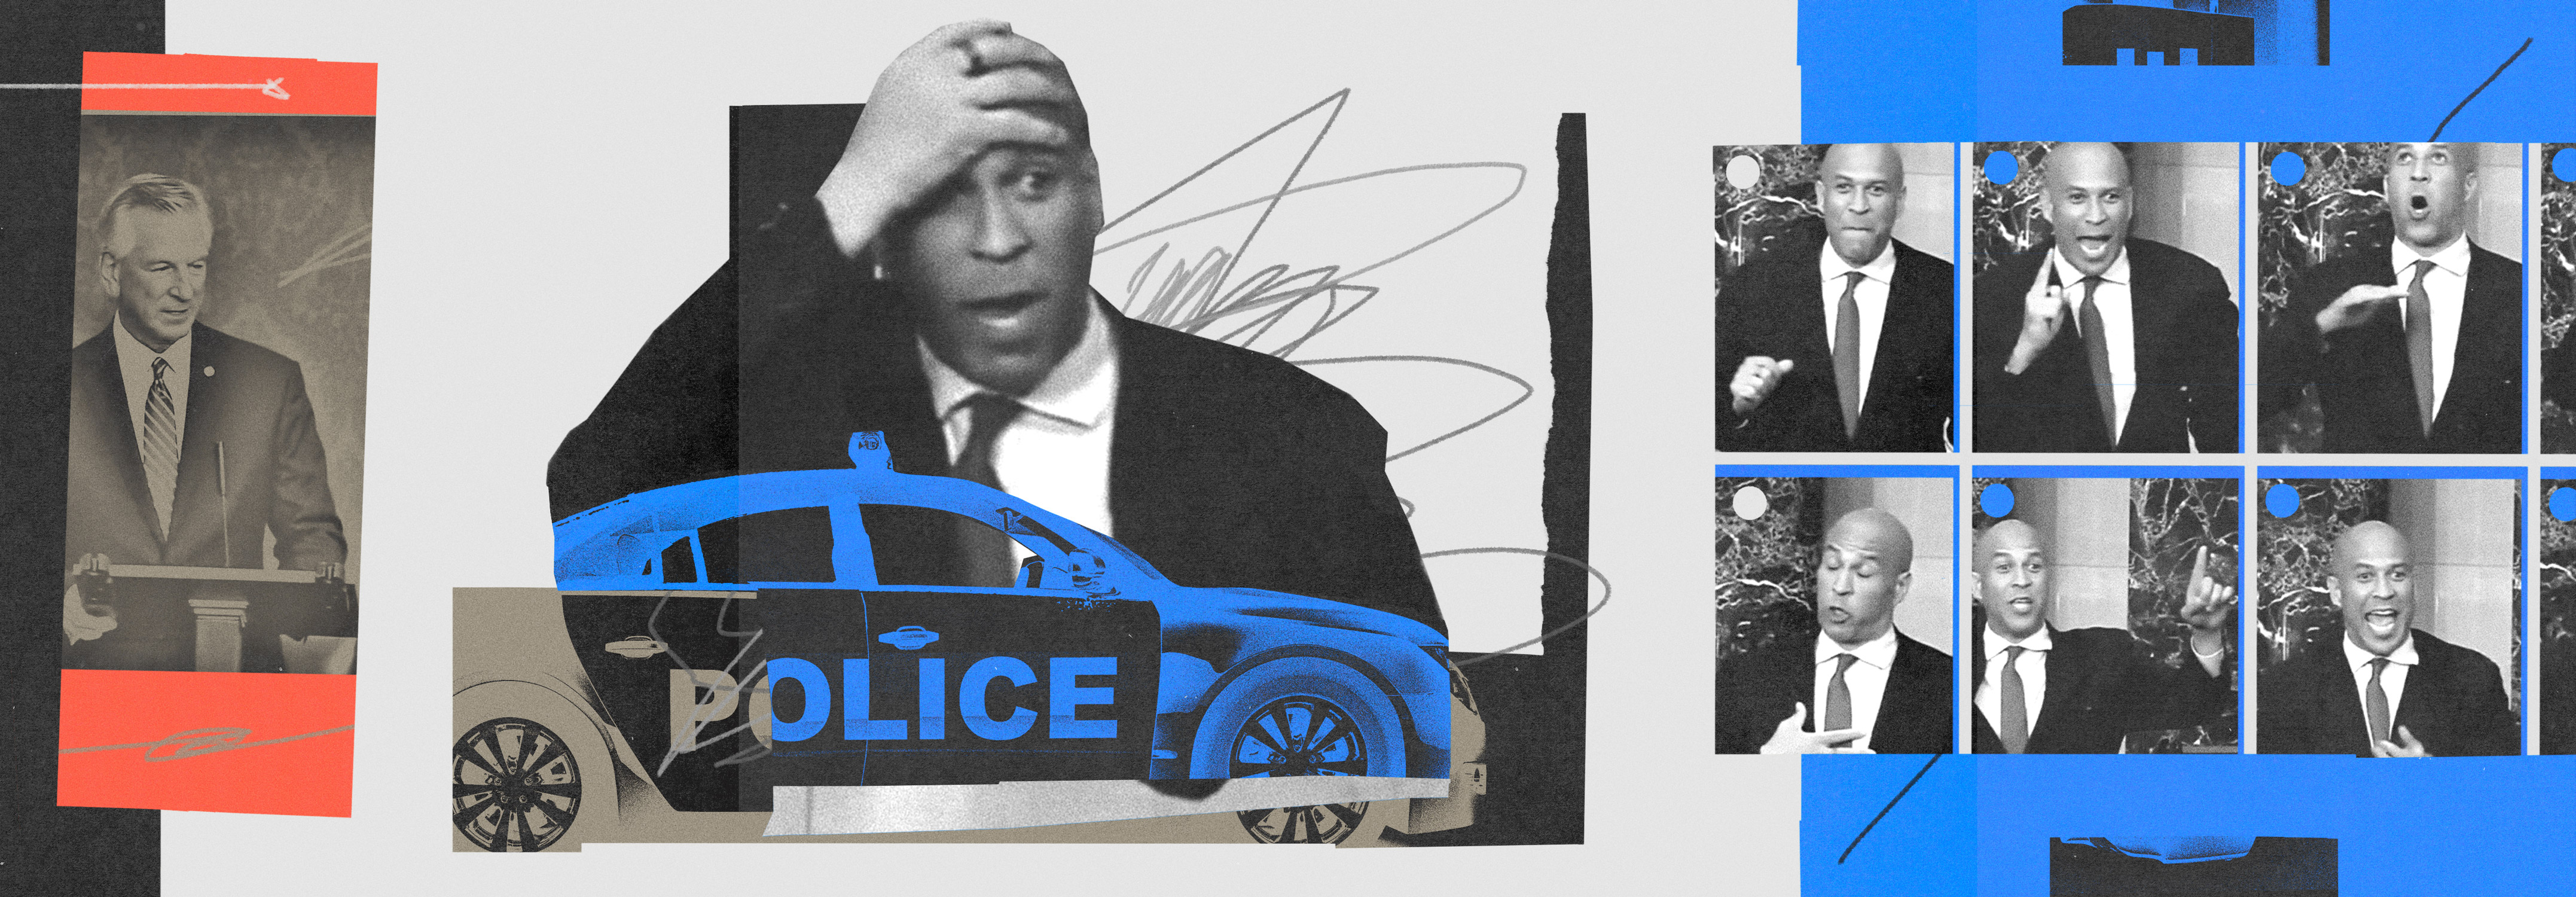 Cory Booker Outfoxed Republicans on ‘Defund the Police.’ Now What? illustration